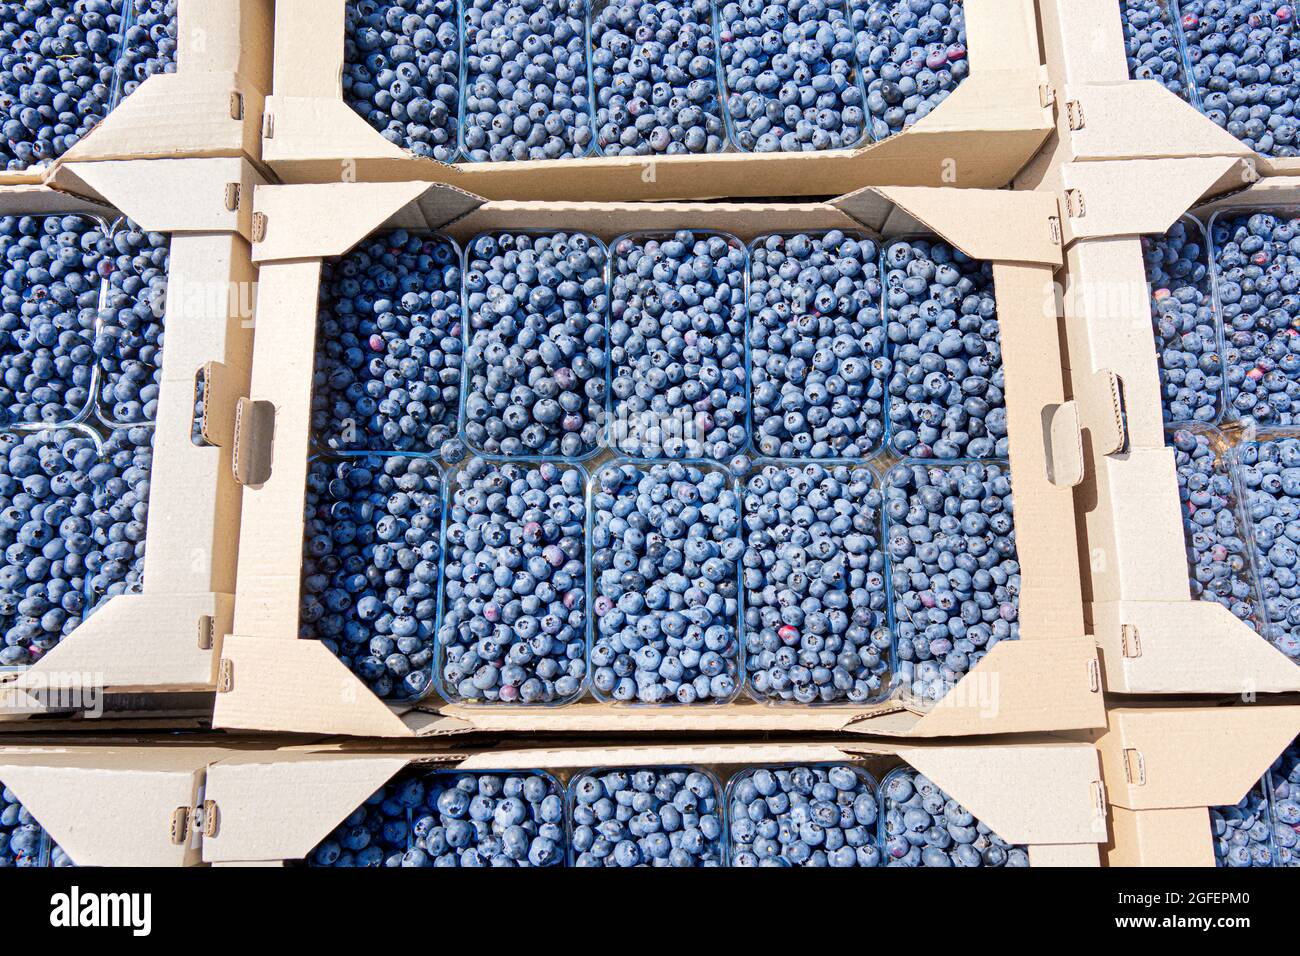 Freshly picked blueberries in self-assembly cardboard boxes ready for shipment Stock Photo